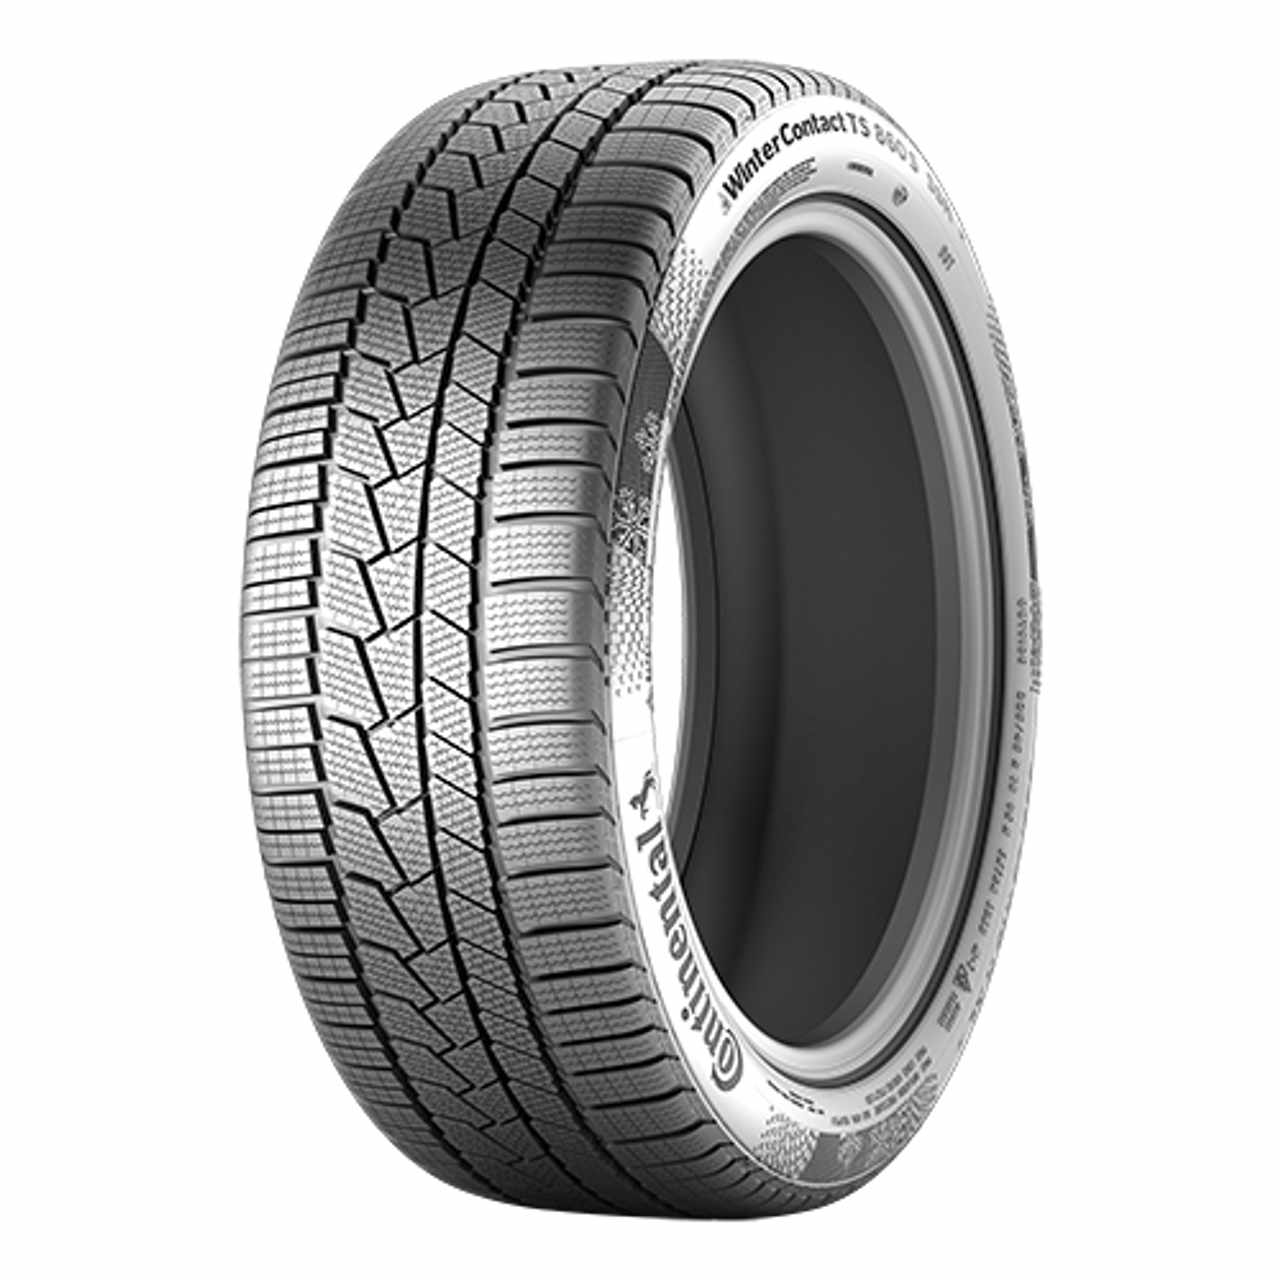 CONTINENTAL WINTERCONTACT TS 860 S (*) (EVc) 195/60R16 89H BSW von Continental